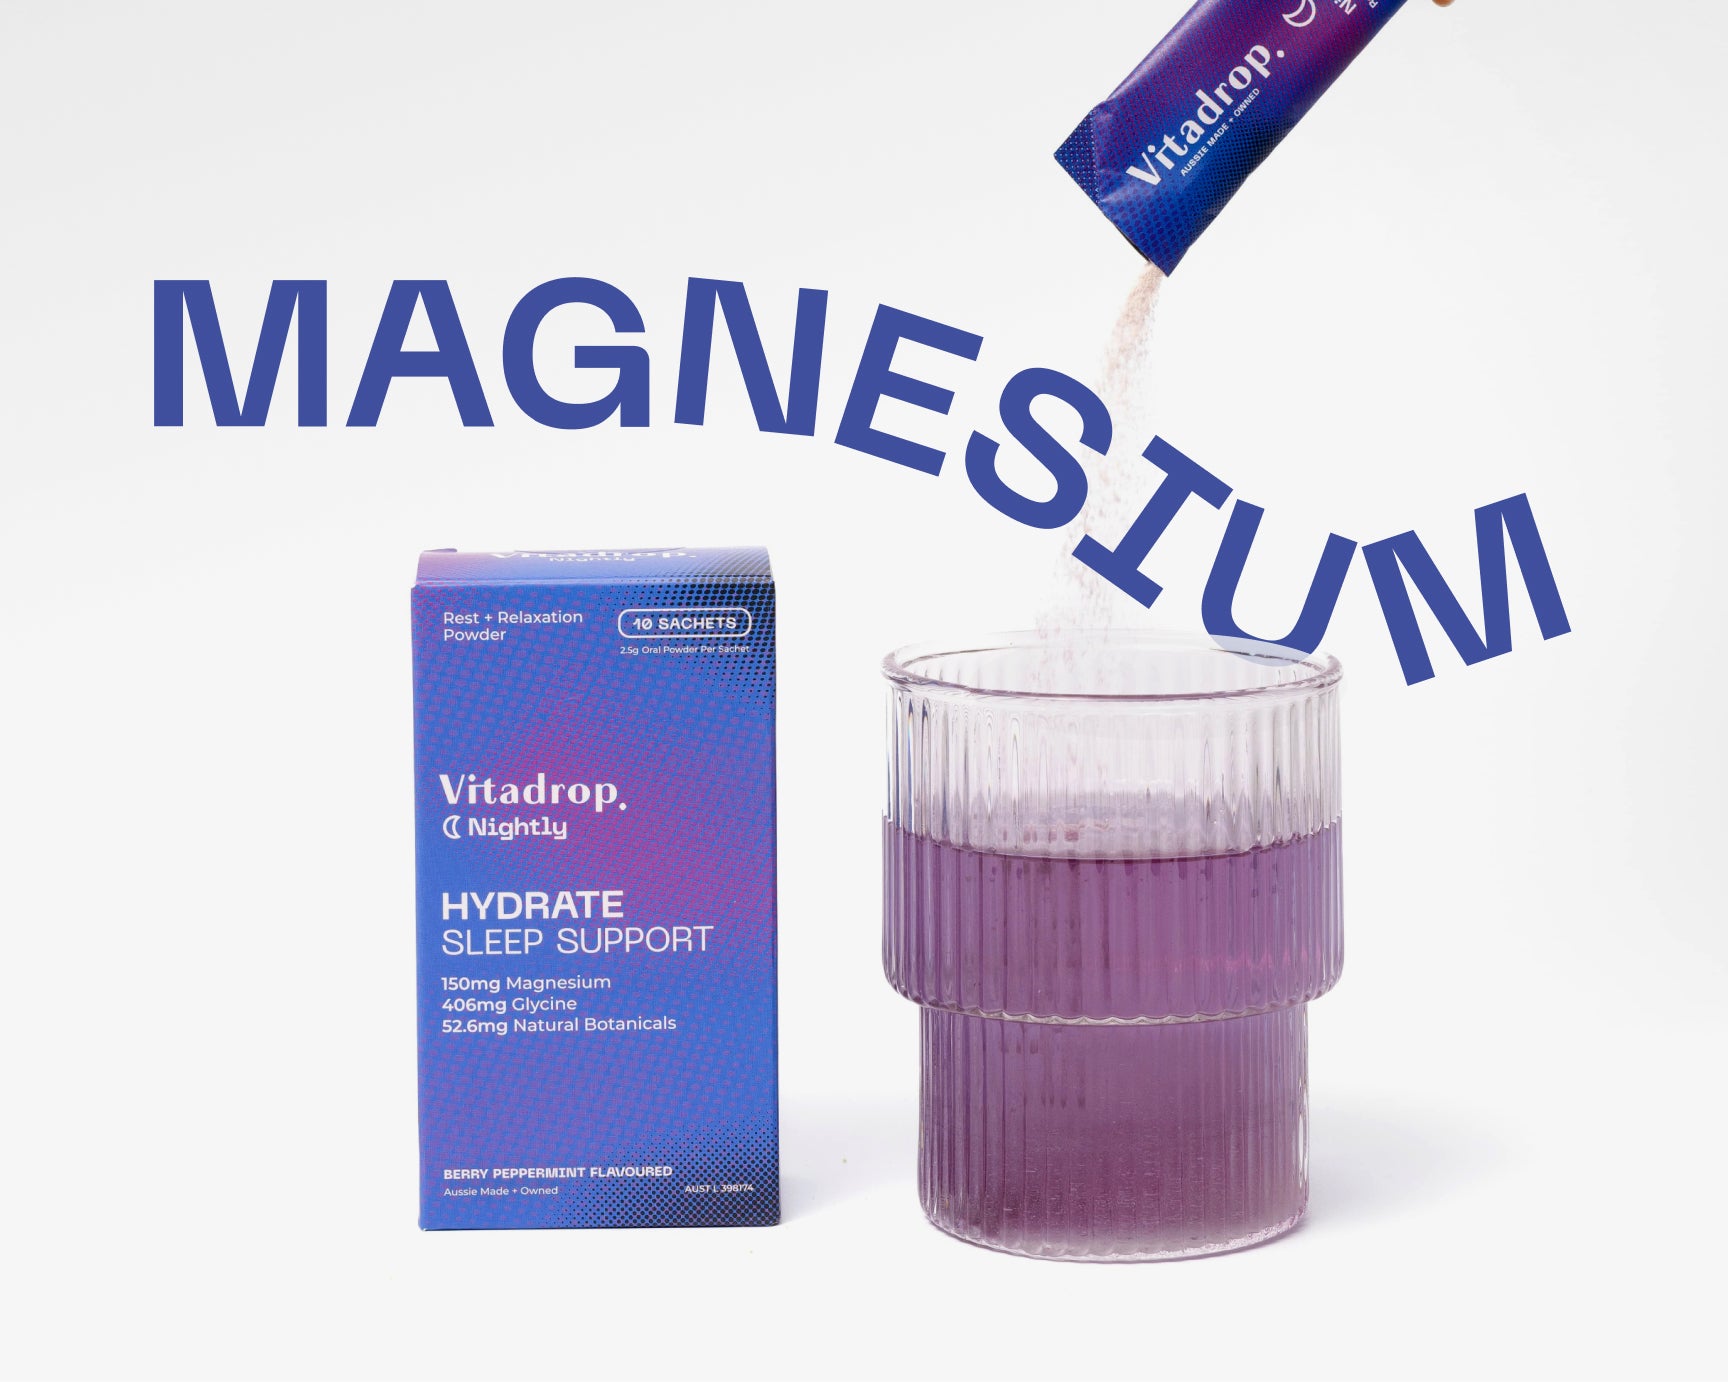 Magnesium: What Does It Do + Why Is It Good For The Body?